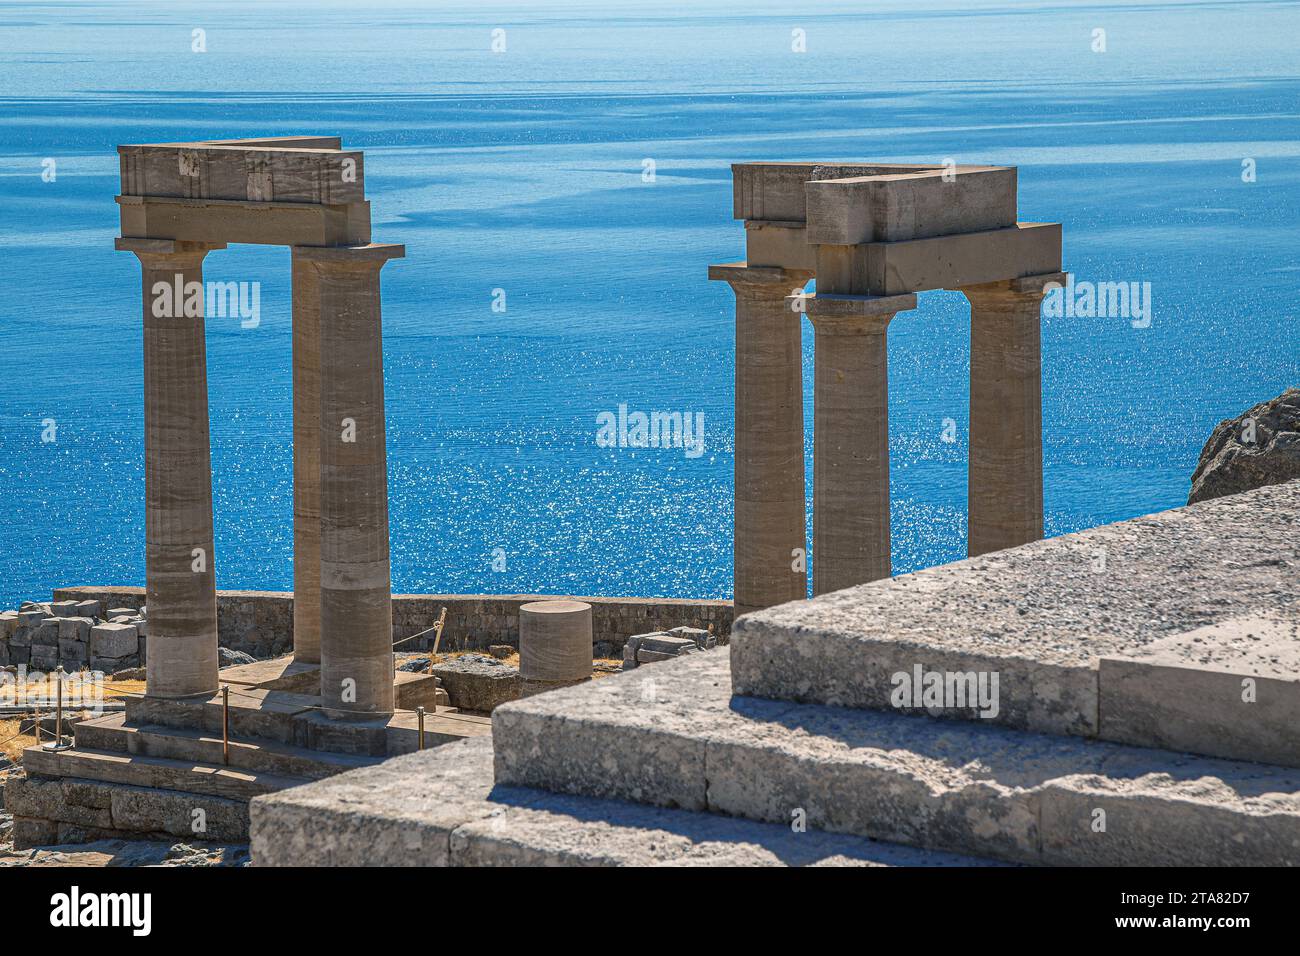 Ruins of ancient Temple of Athena Lindia on Acropolis of Lindos, built in the 4th century BC in amphiprostyle with four Doric columns at the front and Stock Photo